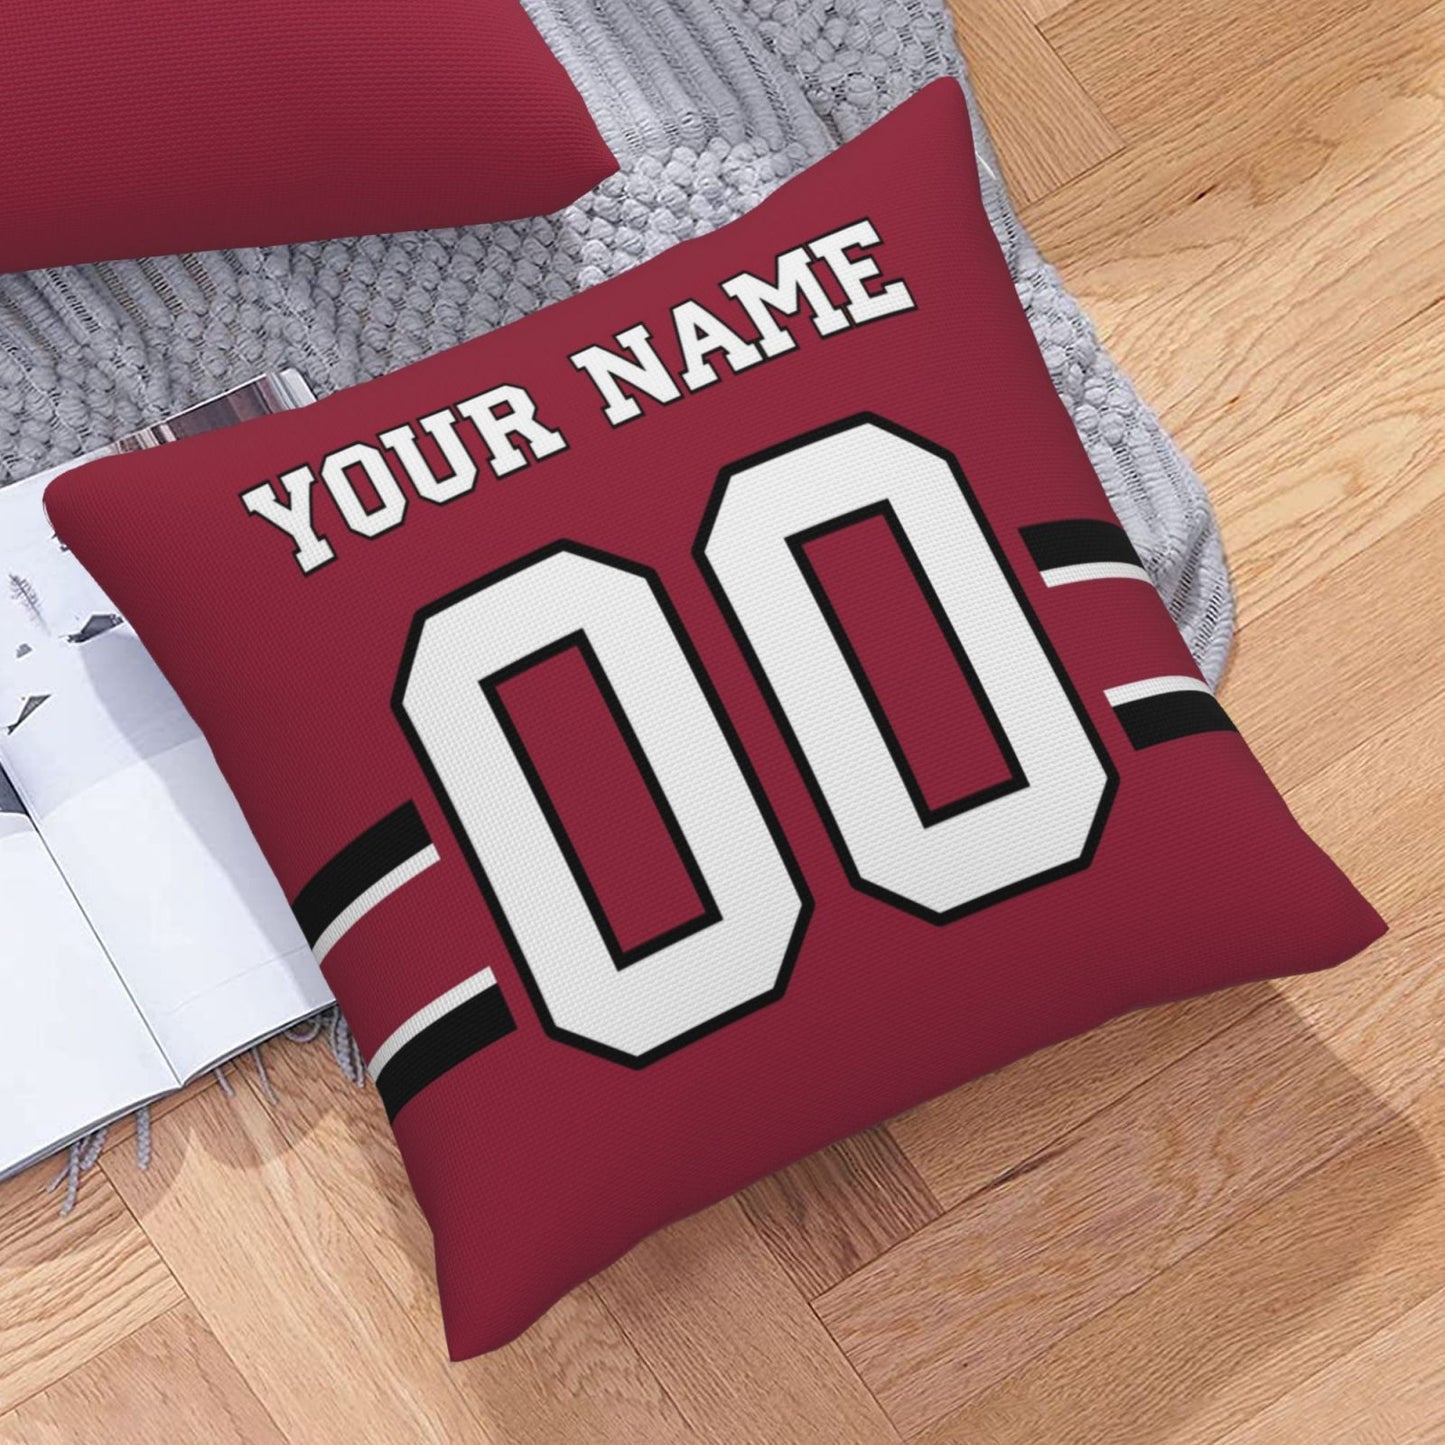 Arizona Cardinals Football Team Decorative Throw Pillow Case Print Personalized Football Style Fans Letters & Number Pillowcase Birthday Gift